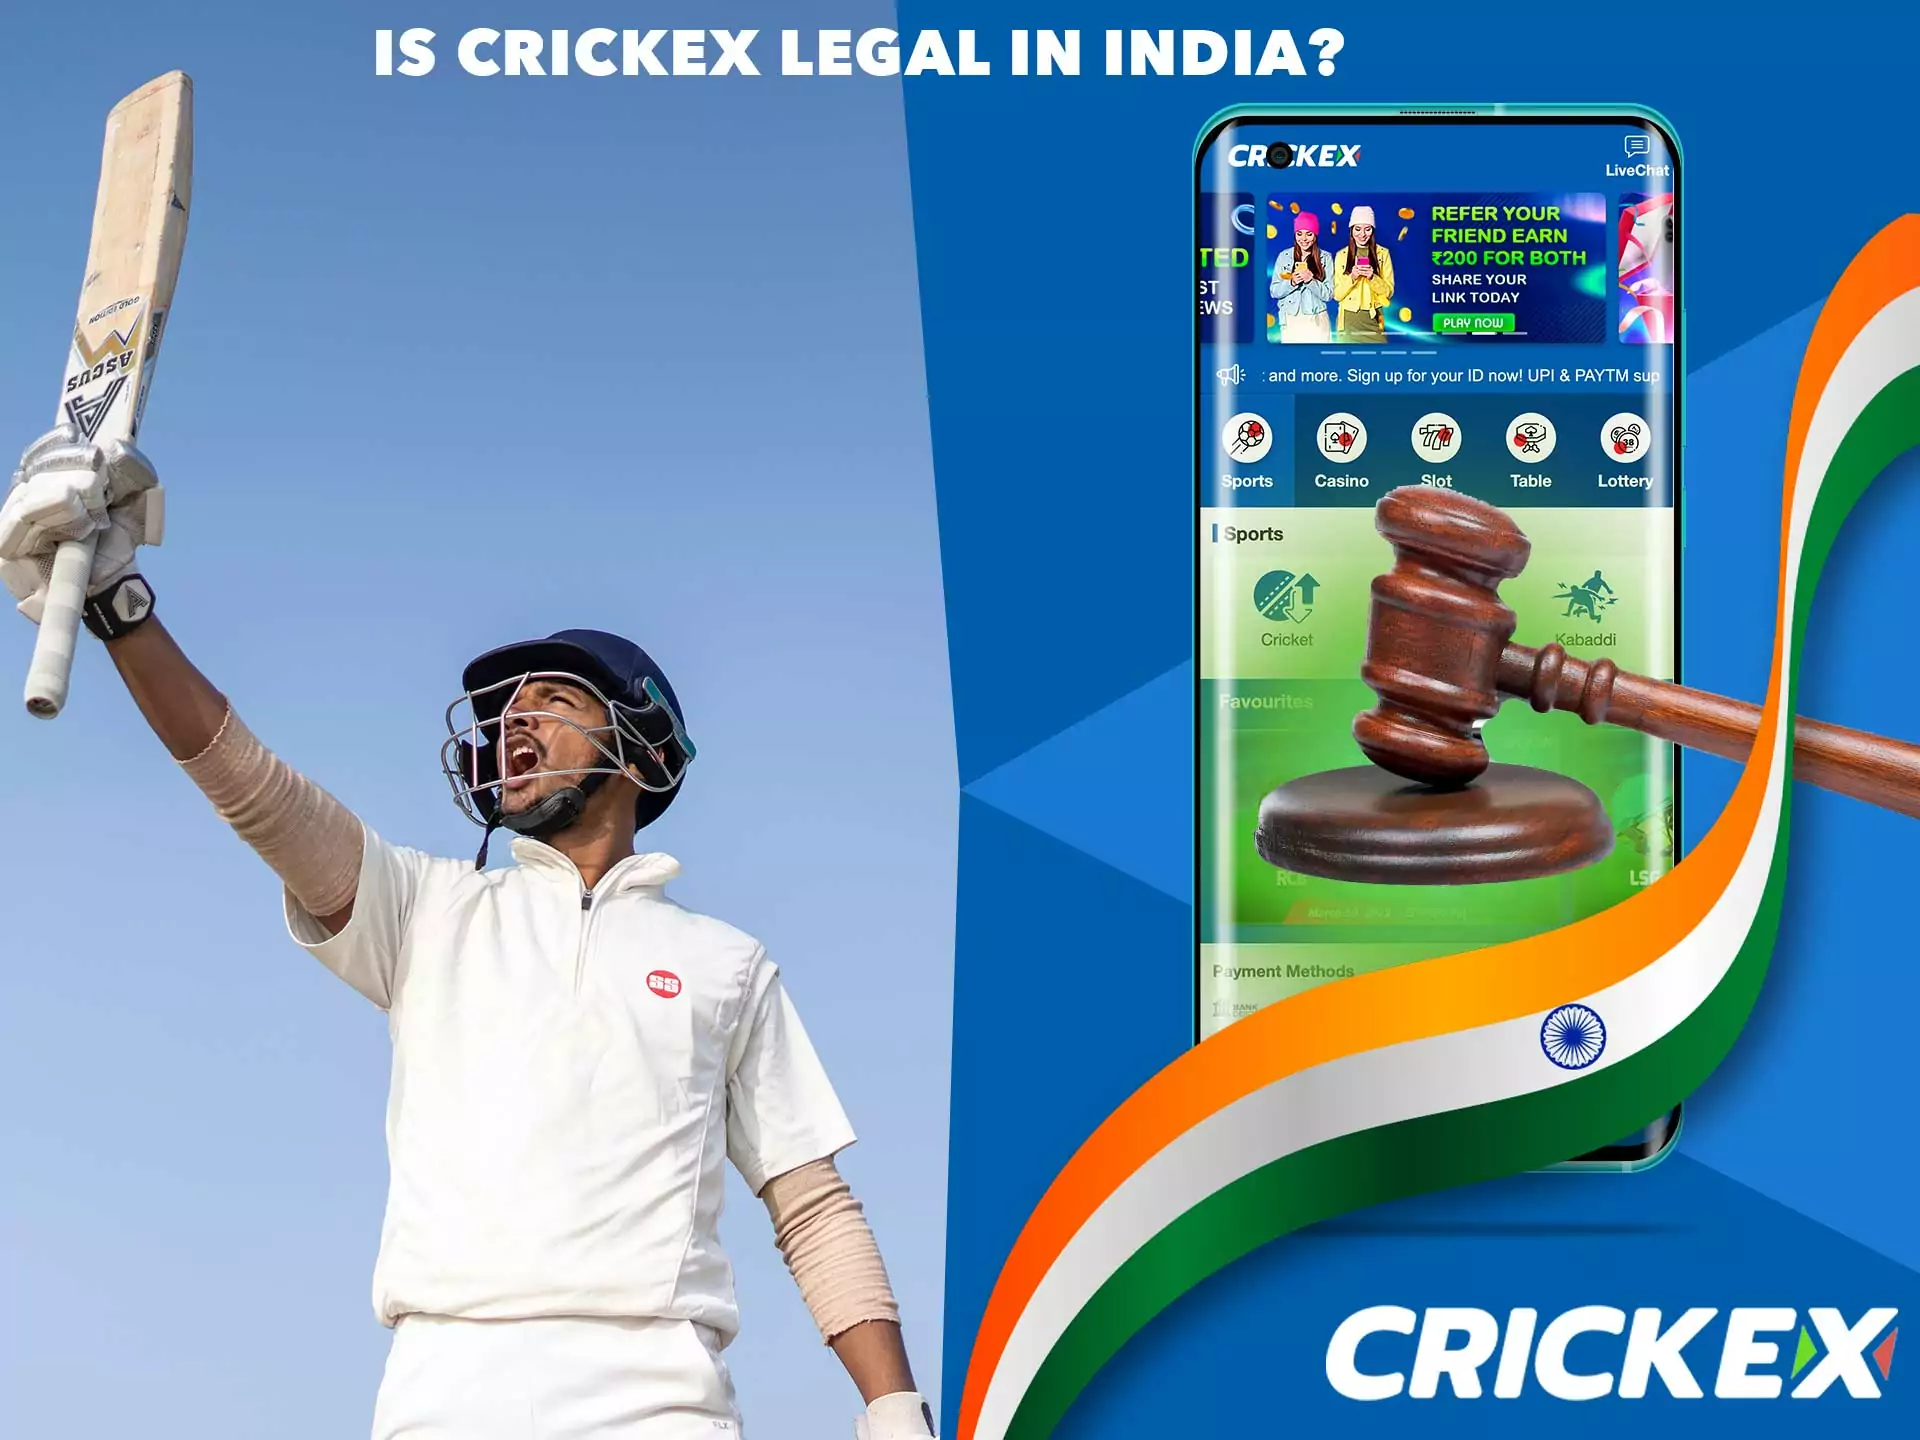 Crickex is absolutely legal in India.